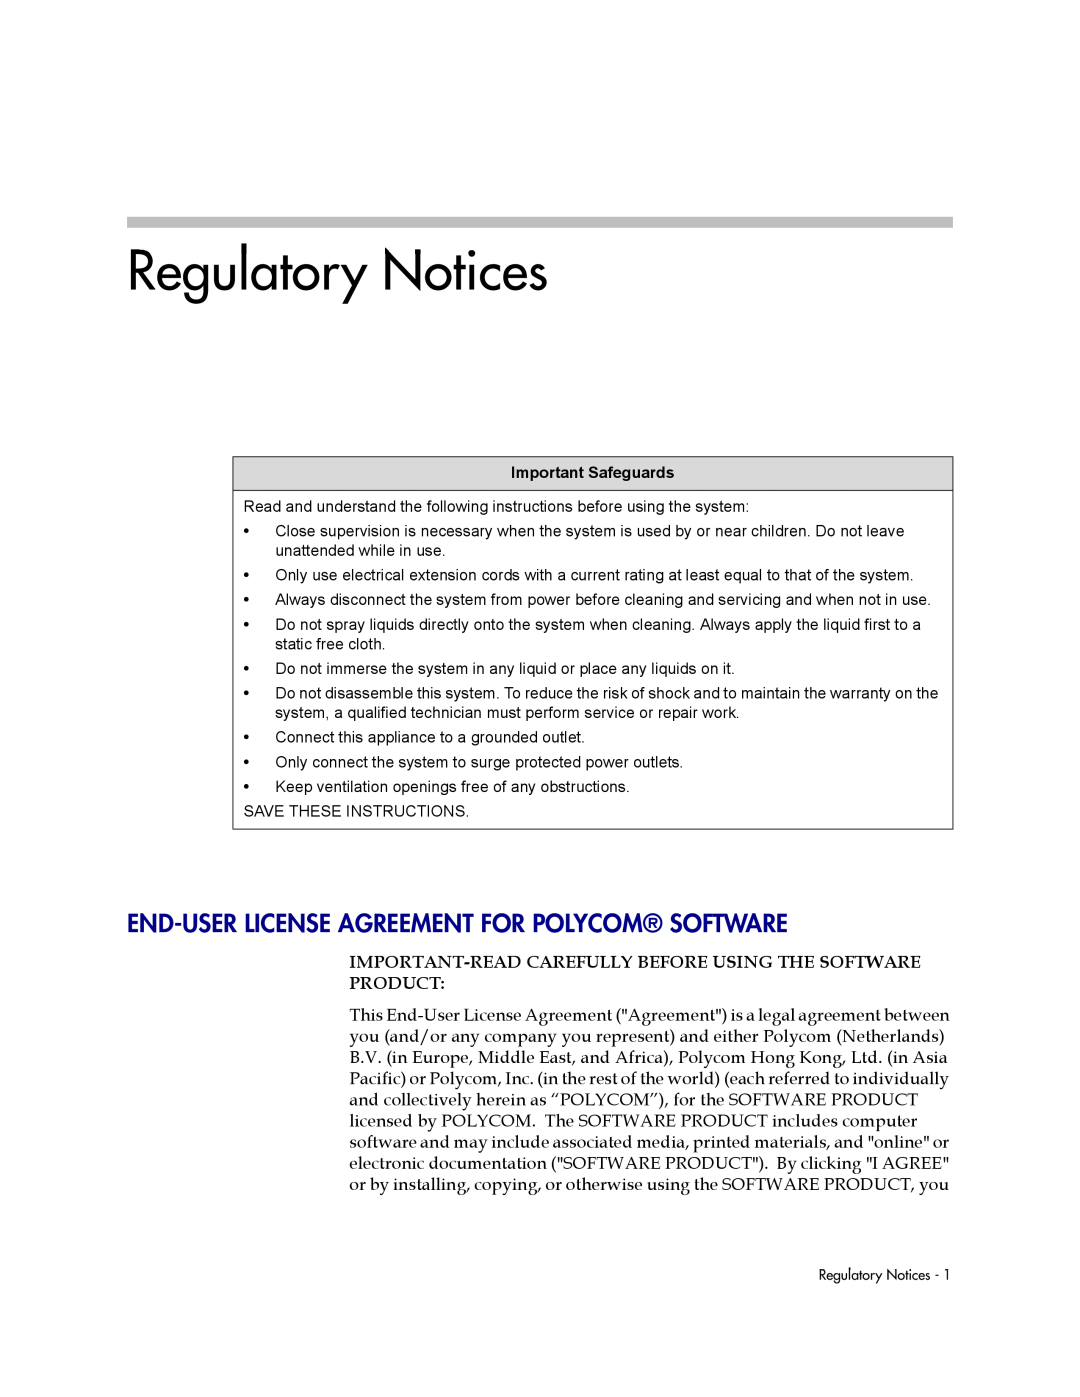 Polycom 6400-S manual Regulatory Notices, End-User License Agreement For Polycom Software, Important Safeguards 